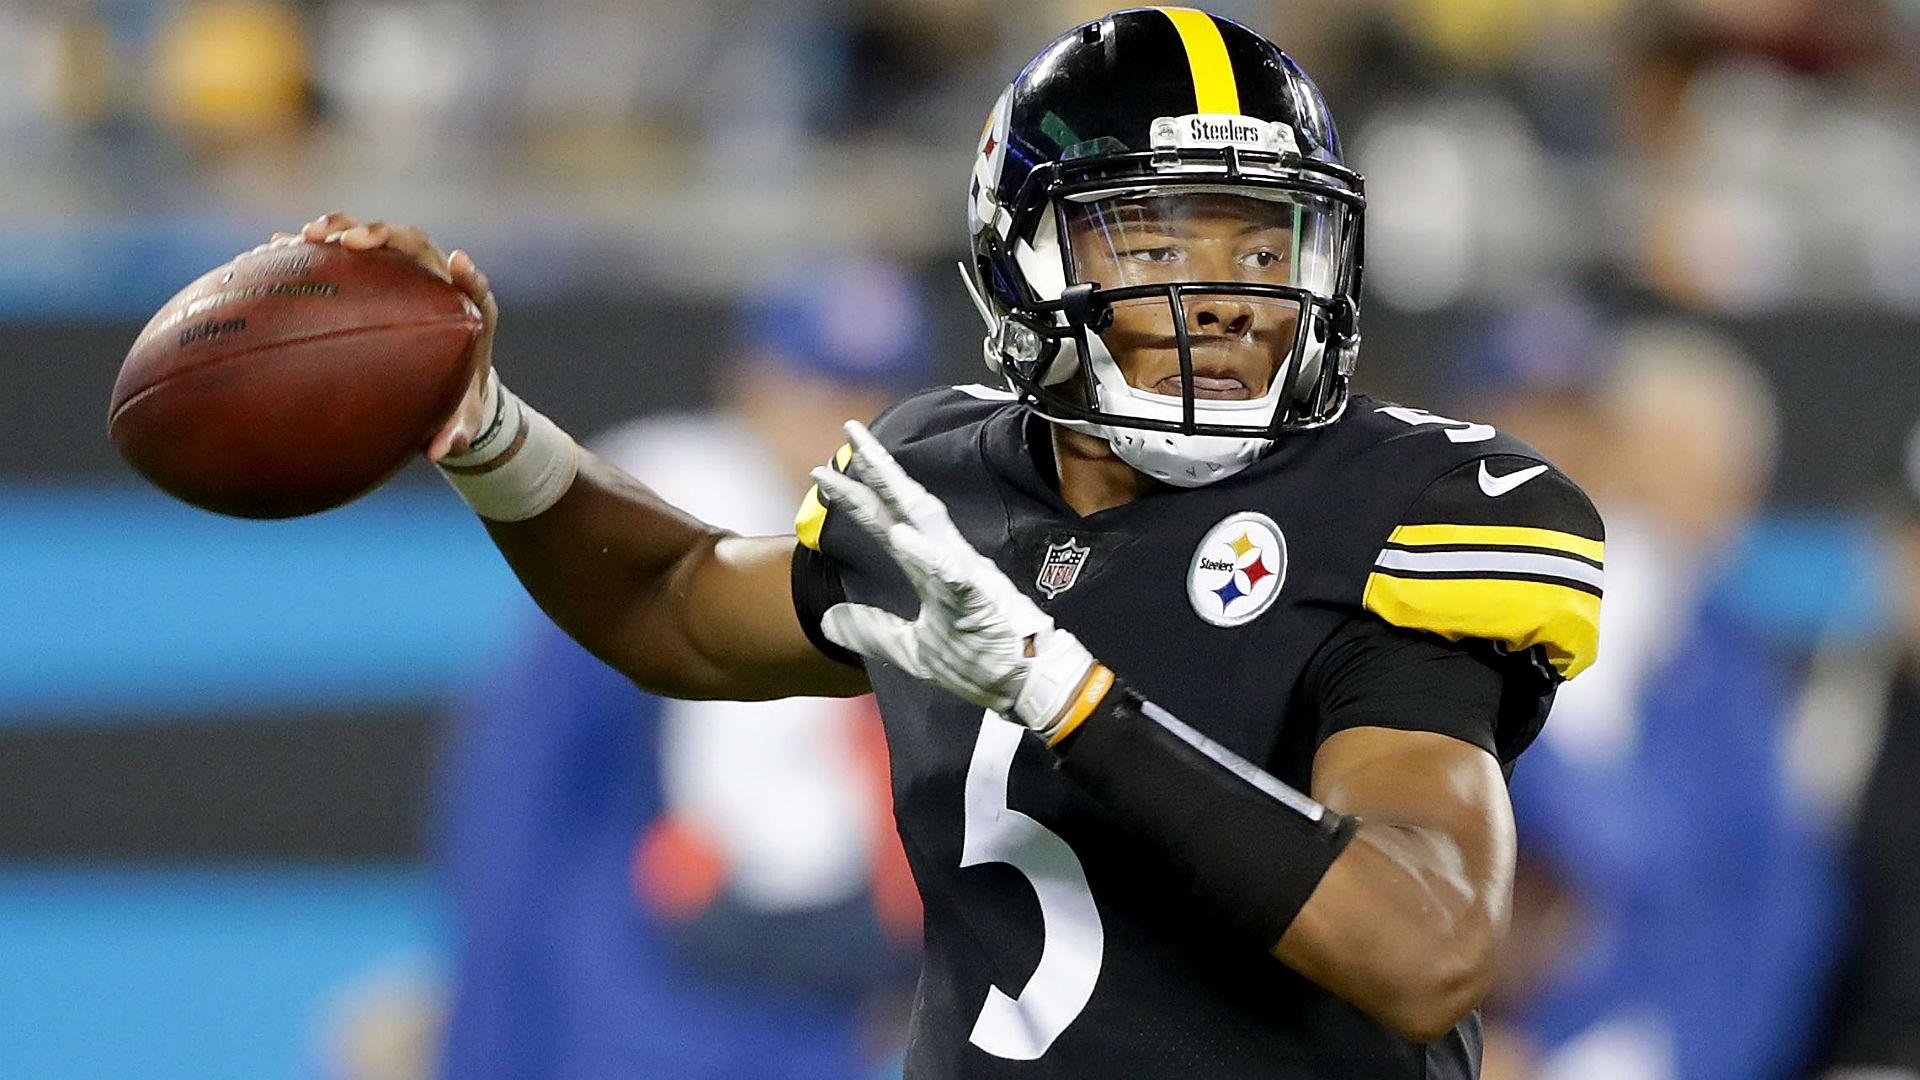 NFL trade rumors: Colts may be interested in Steelers QB